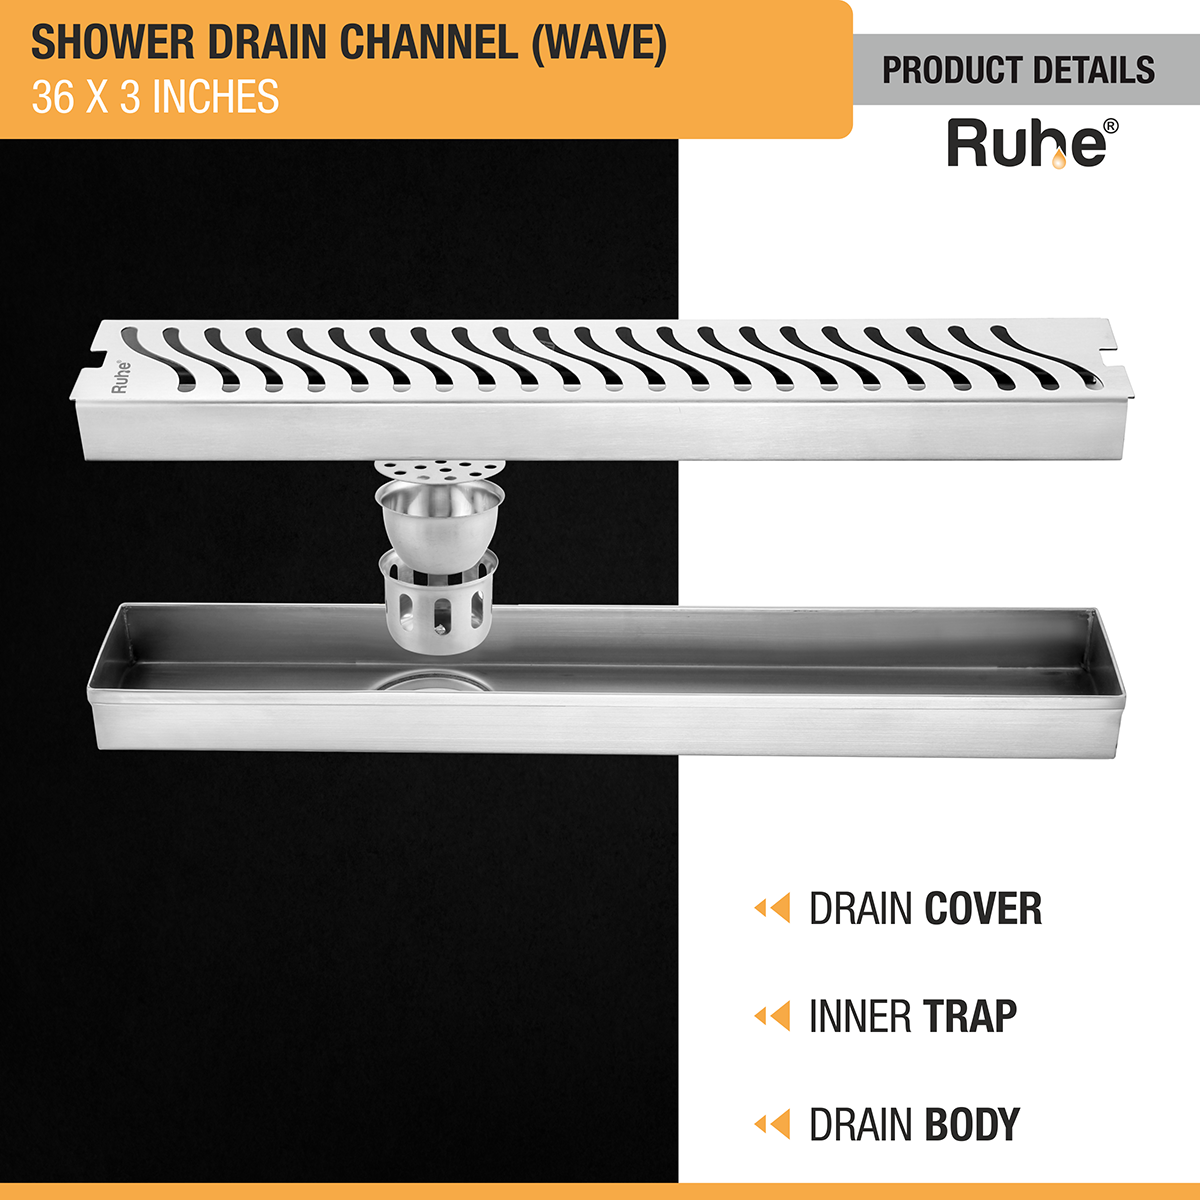 Wave Shower Drain Channel (36 X 3 Inches) with Cockroach Trap (304 Grade) product details